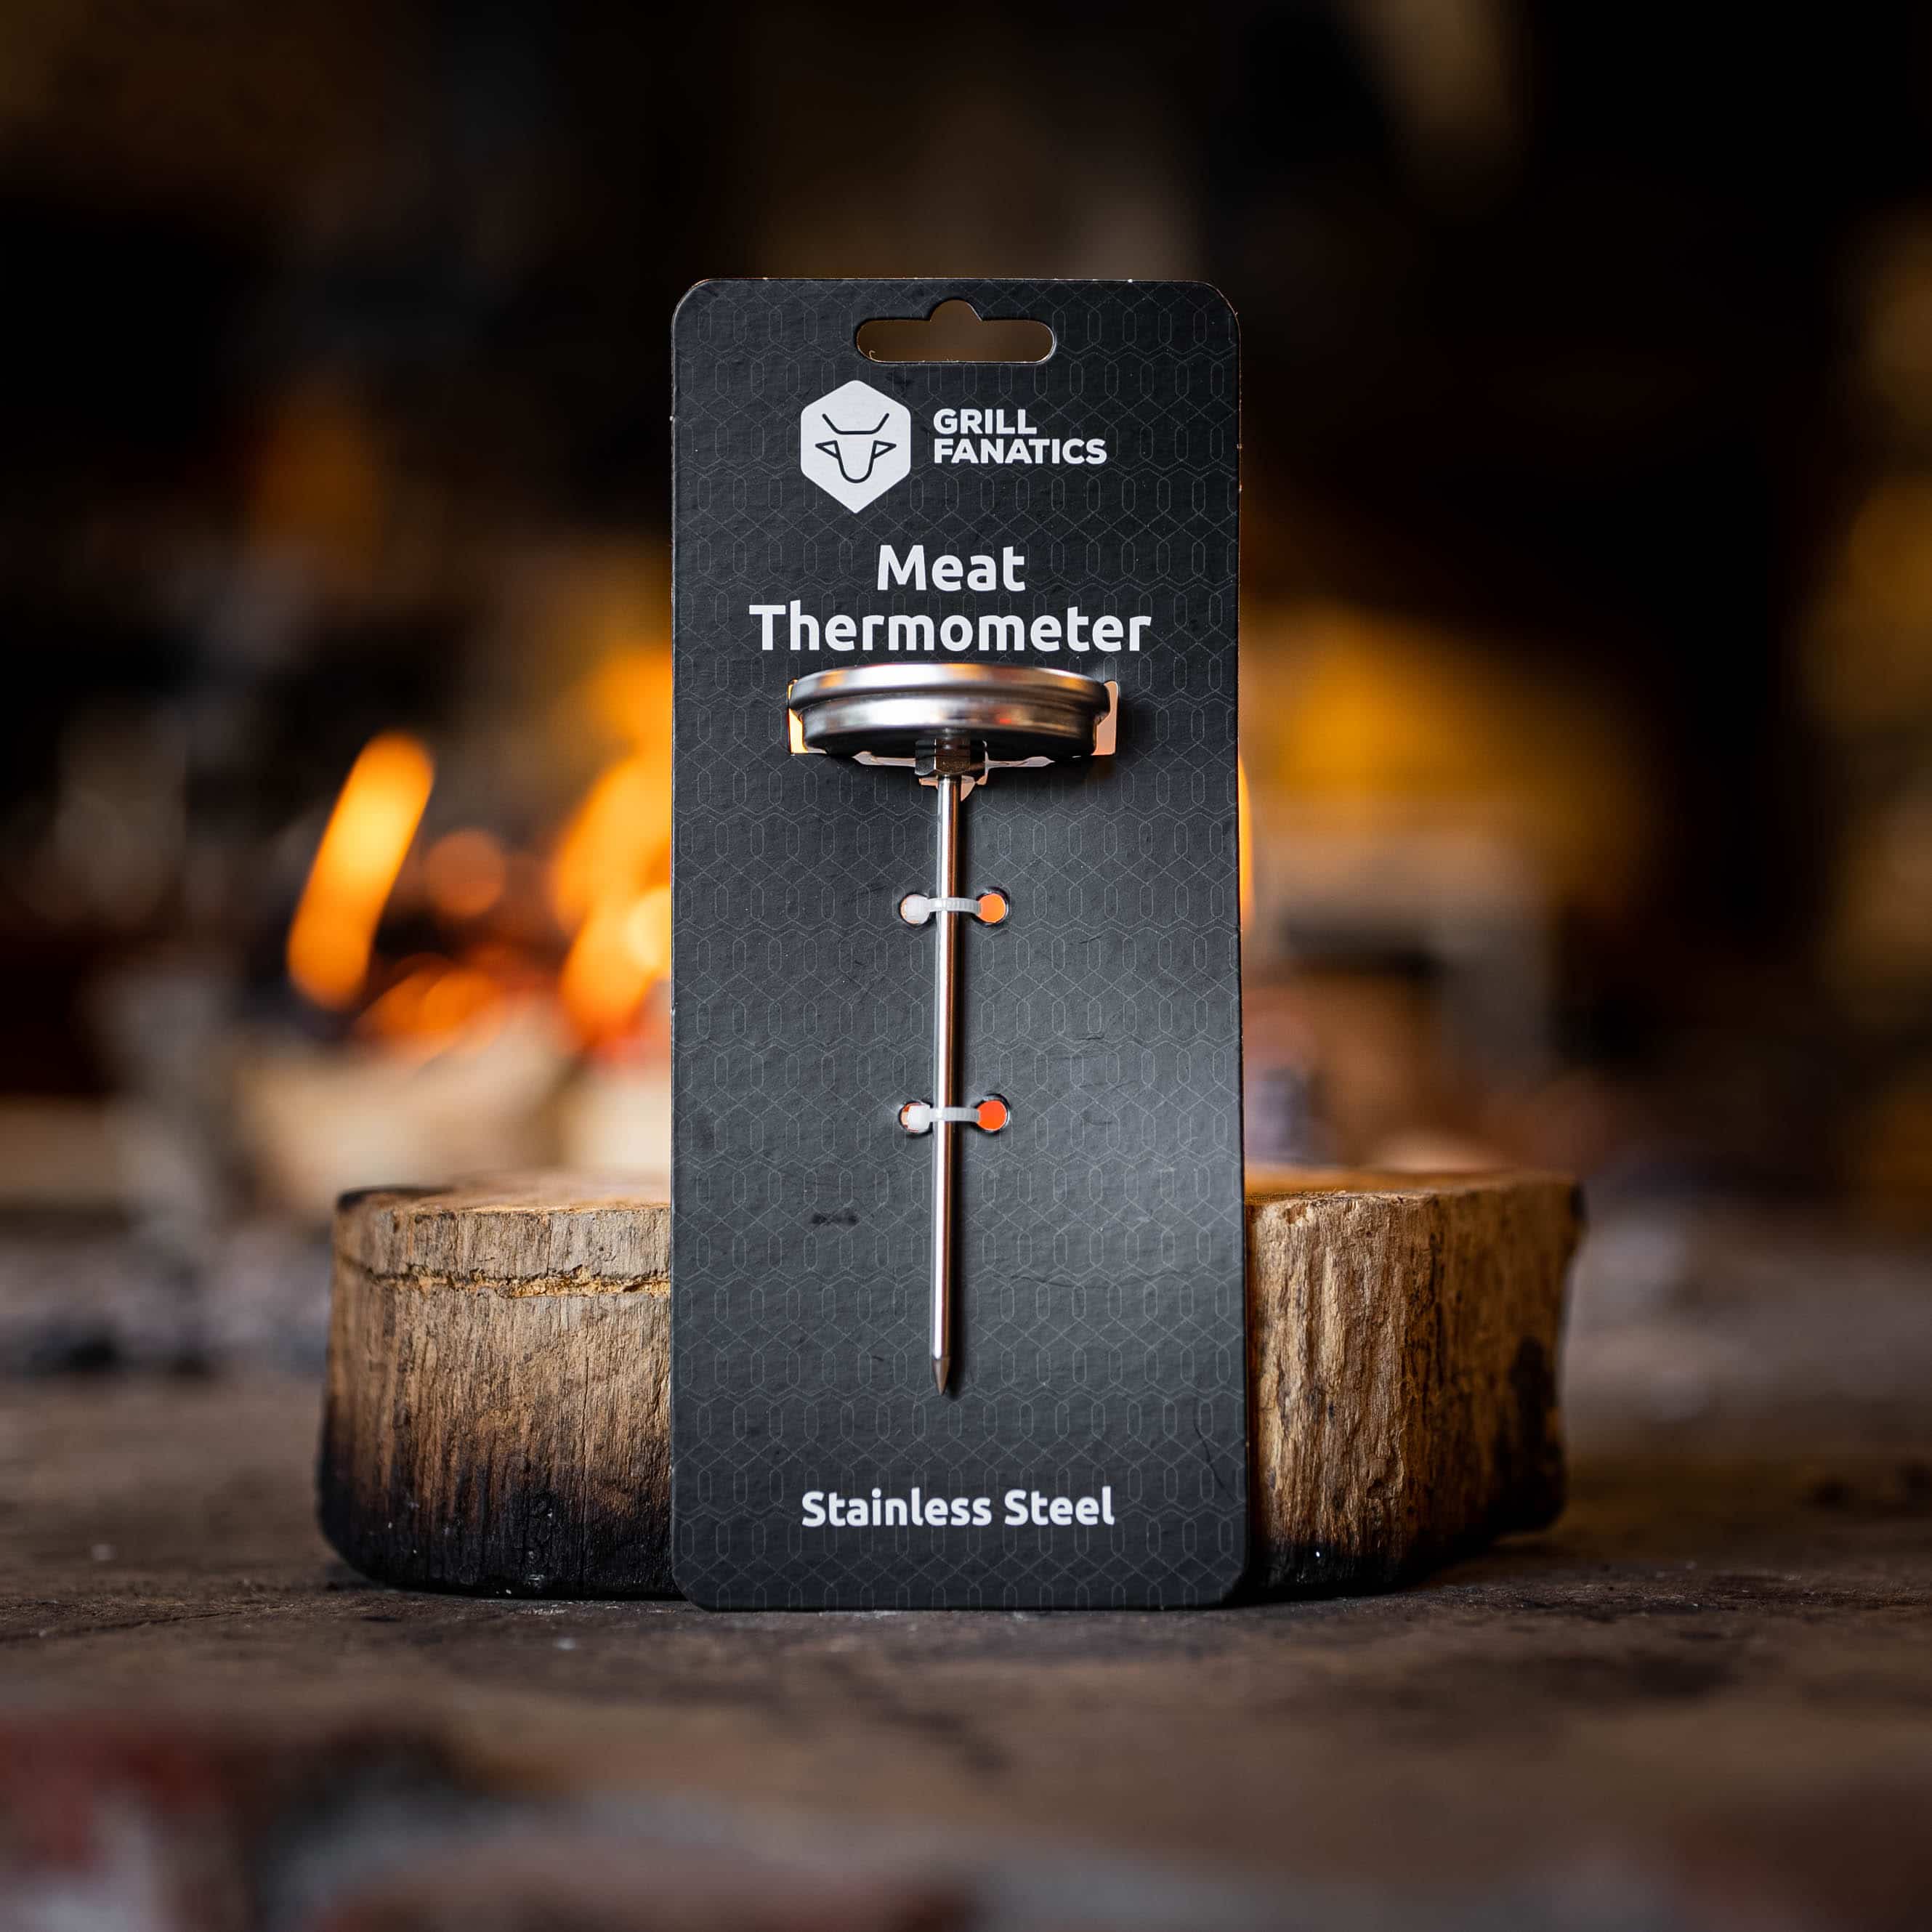 Grill Fanatics Meat Thermometer